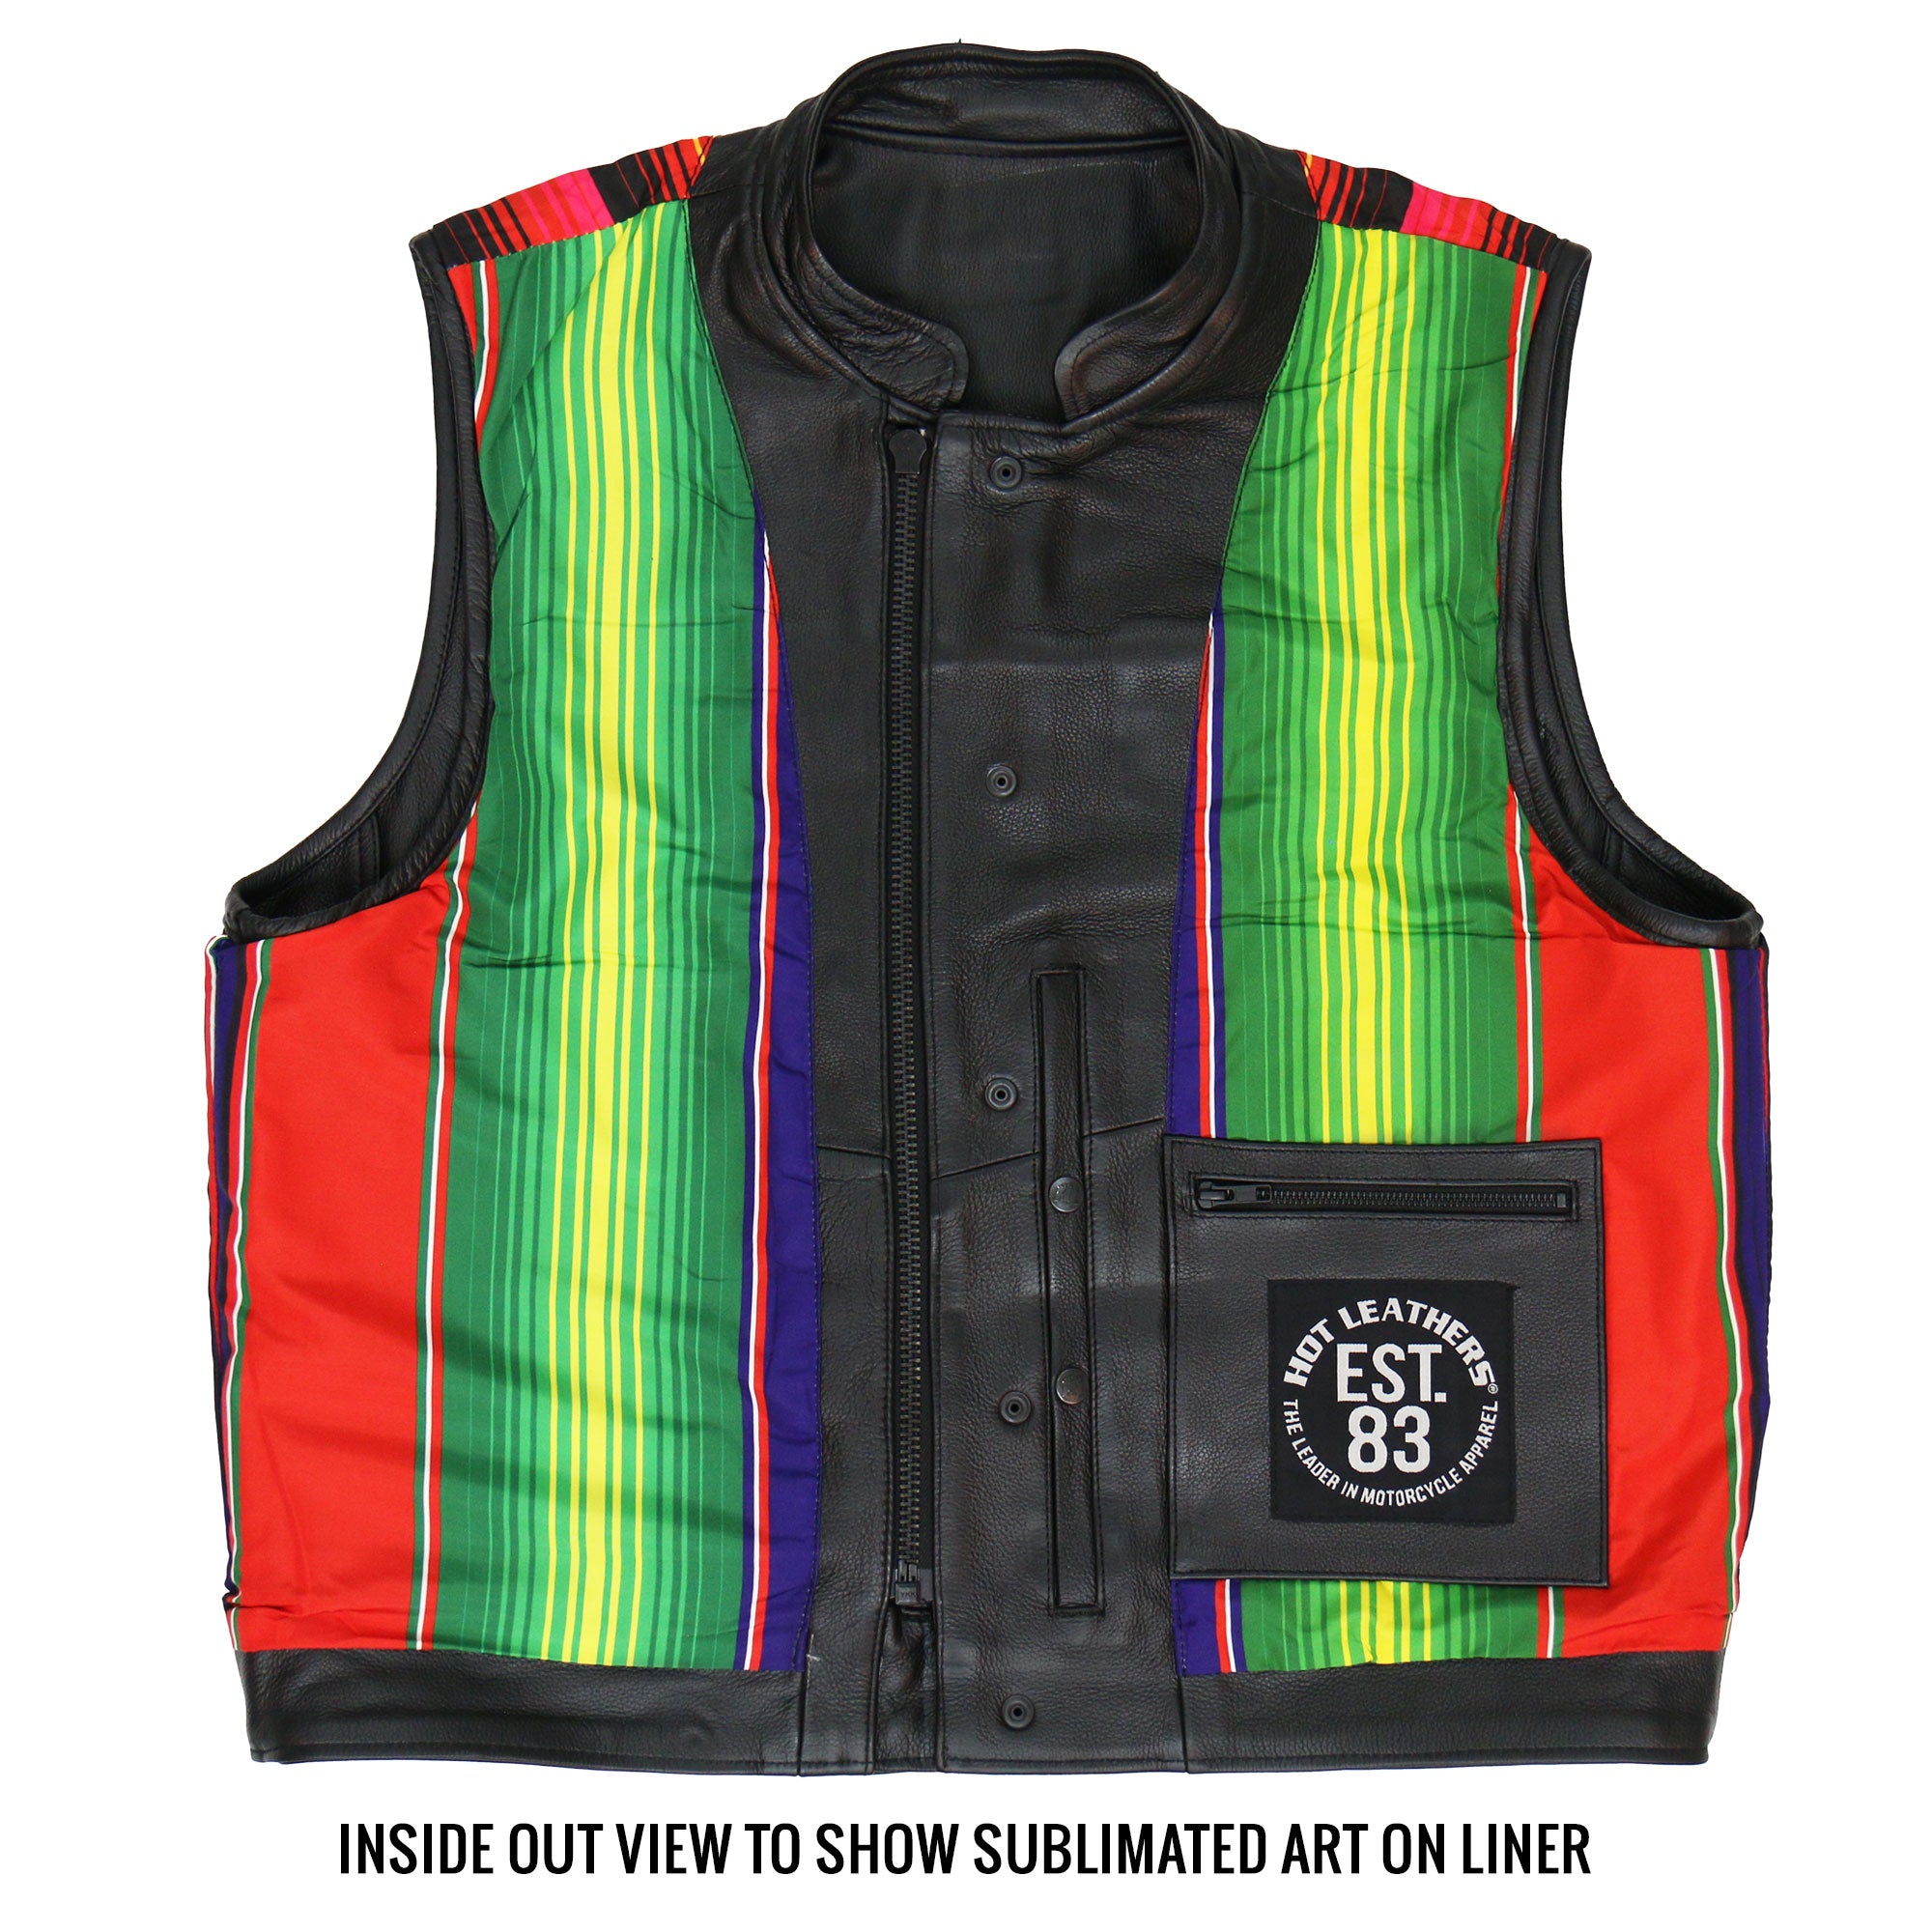 Hot Leathers VSM1057 Men’s Black 'Mexican Blanket' Motorcycle Club Style Conceal and Carry Leather Biker Vest